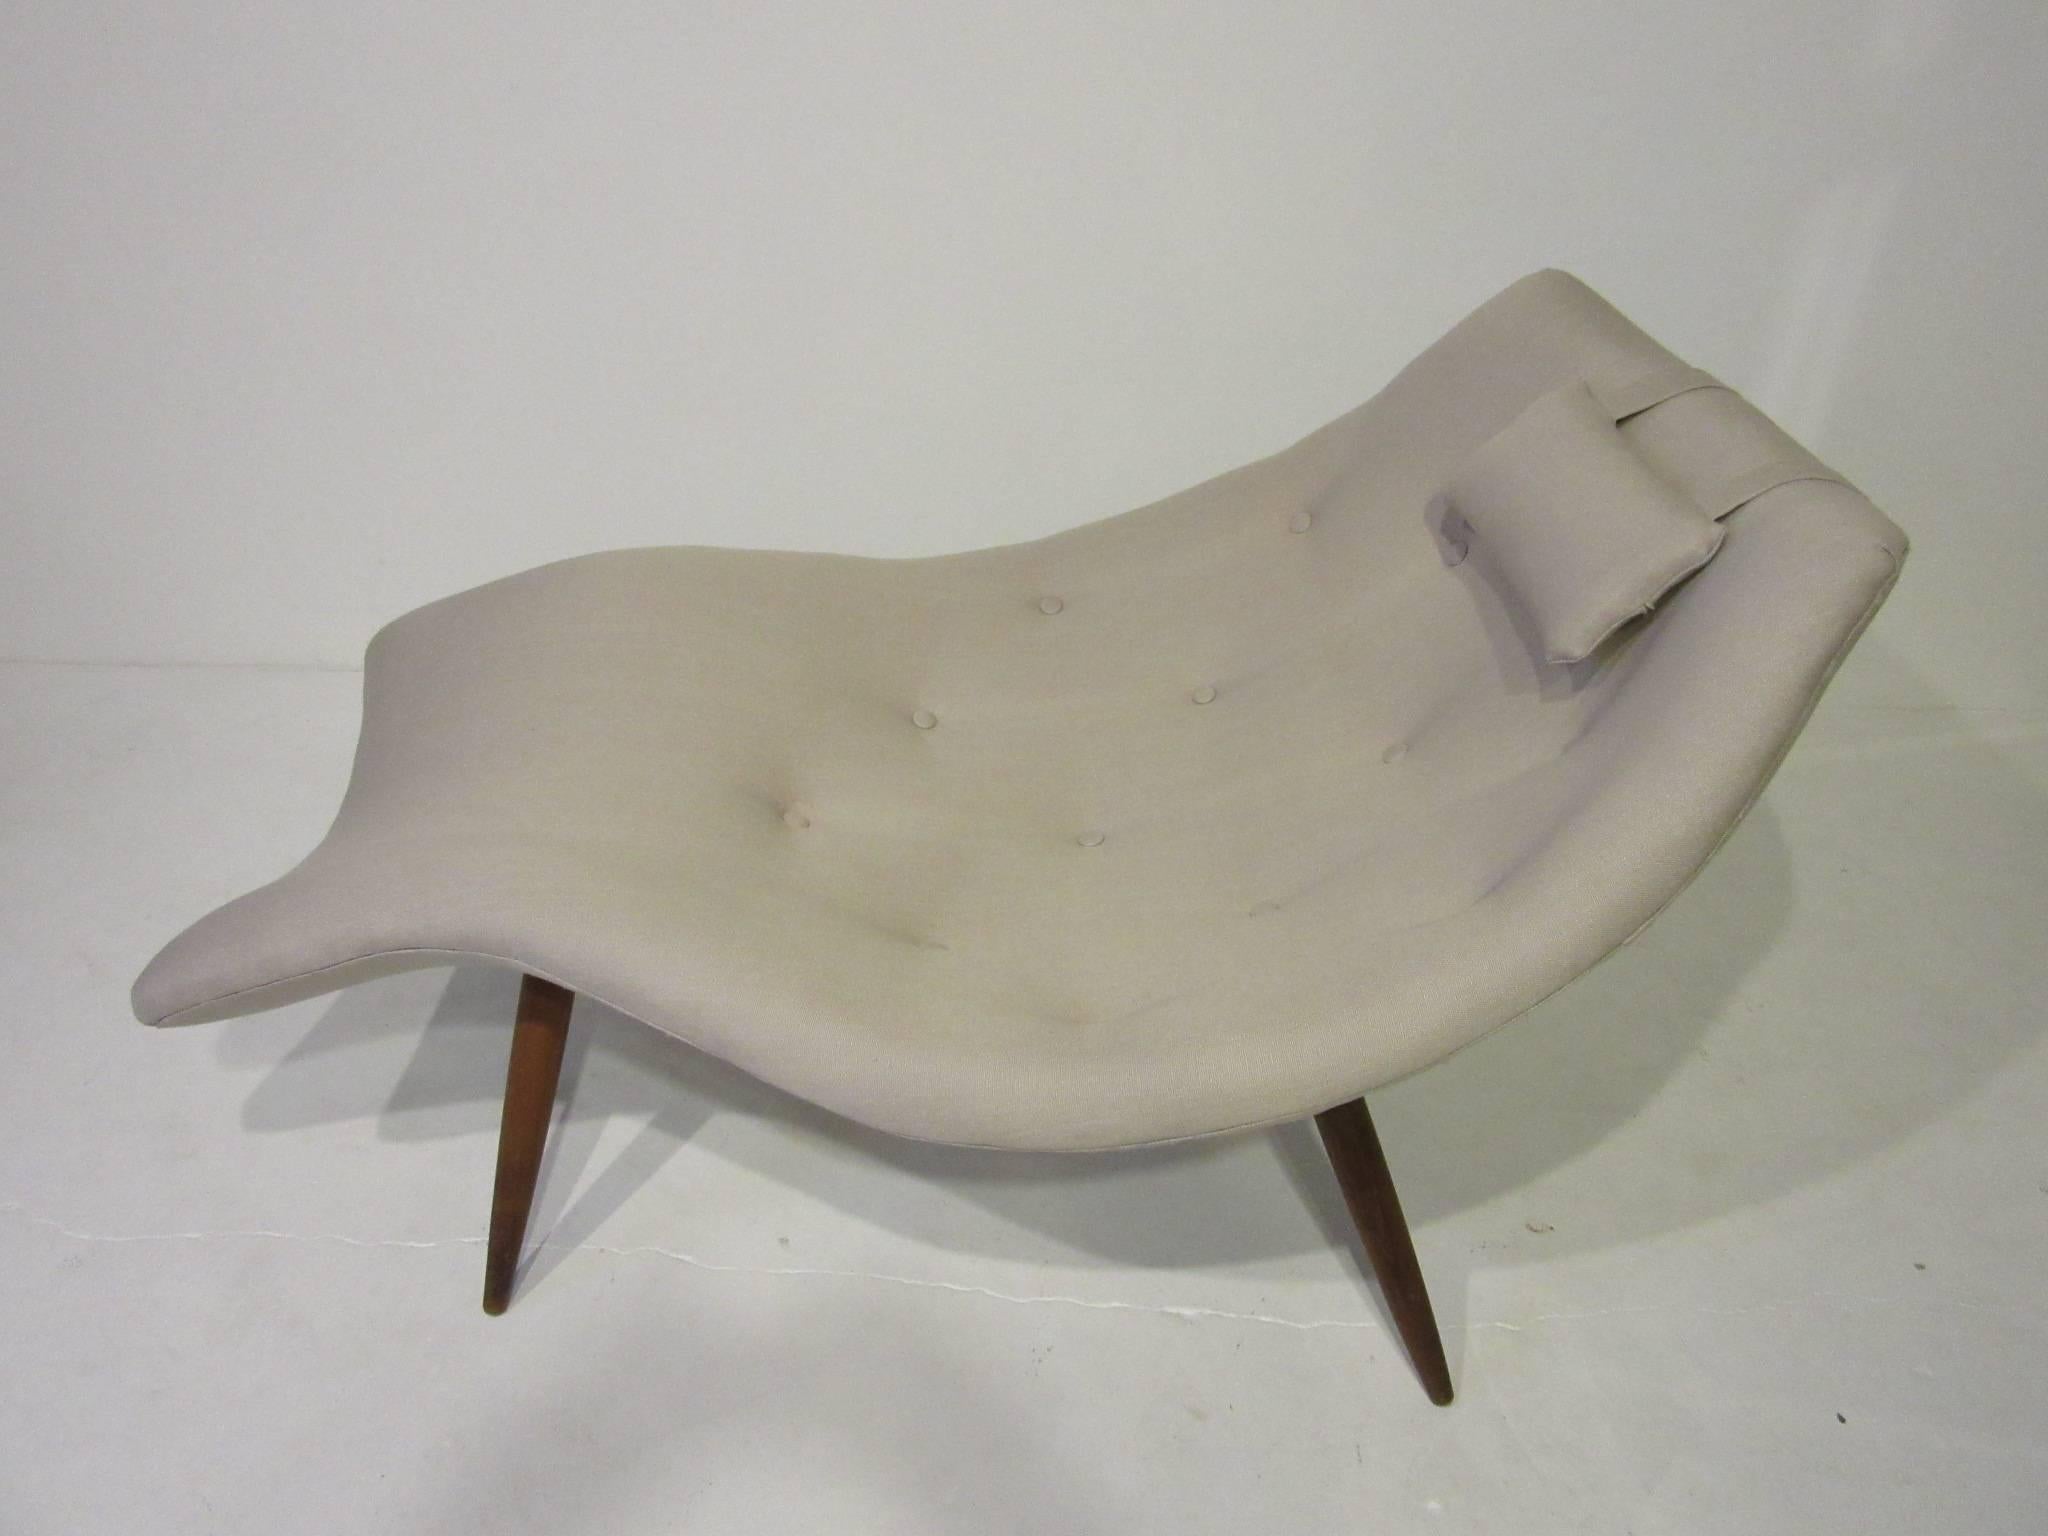 outdoor chaise lounge chair